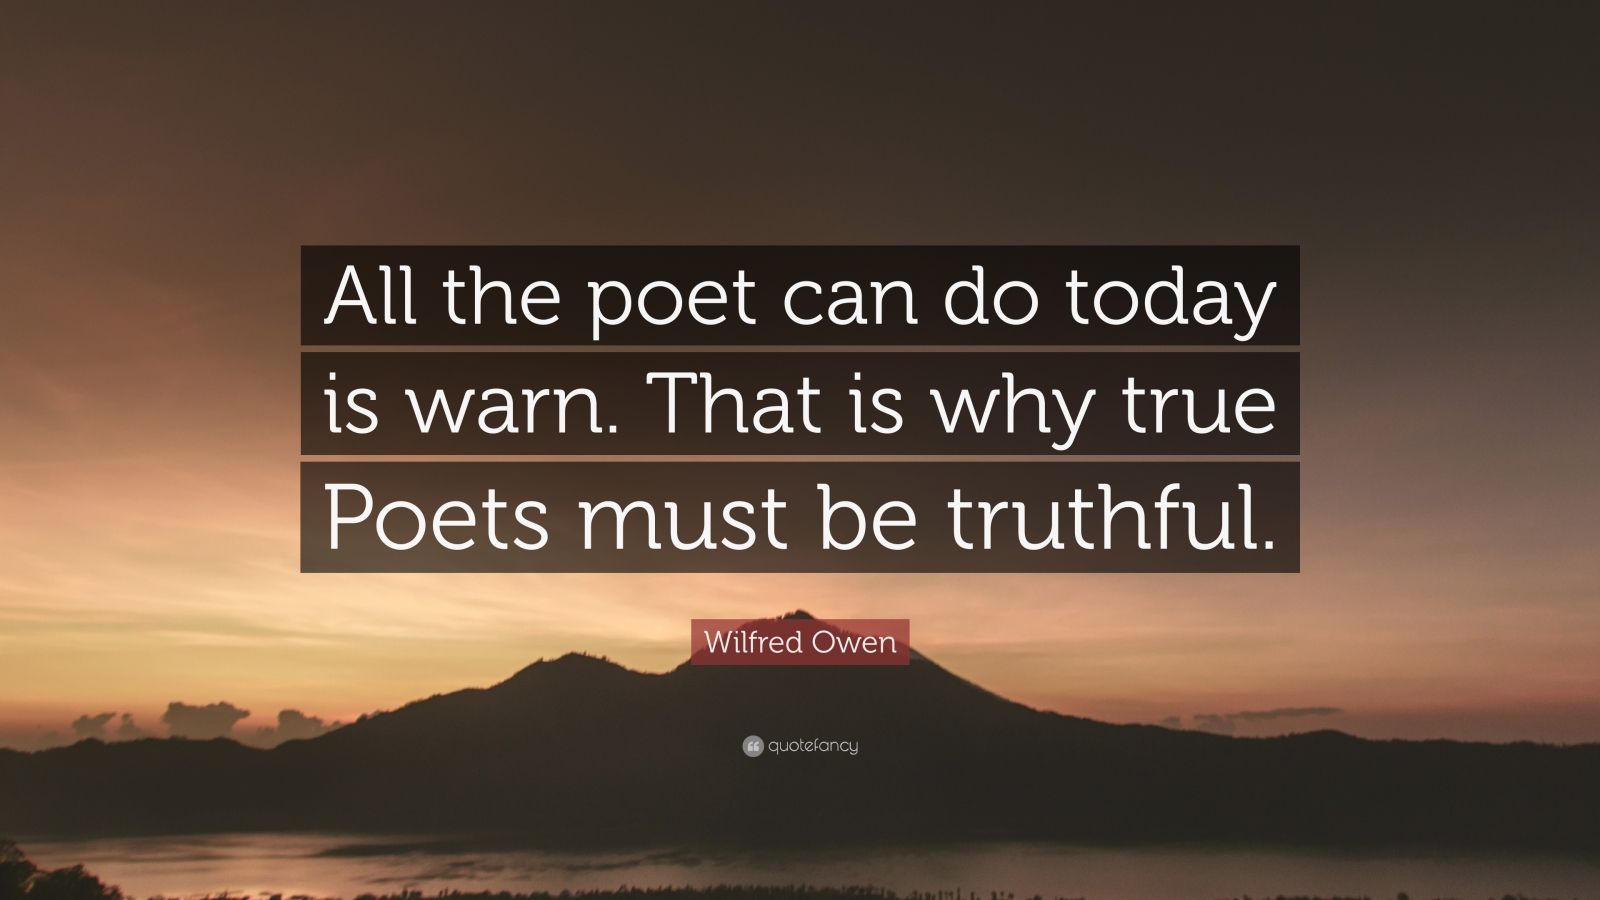 Wilfred Owen Quote: "All the poet can do today is warn. That is why true Poets must be truthful ...